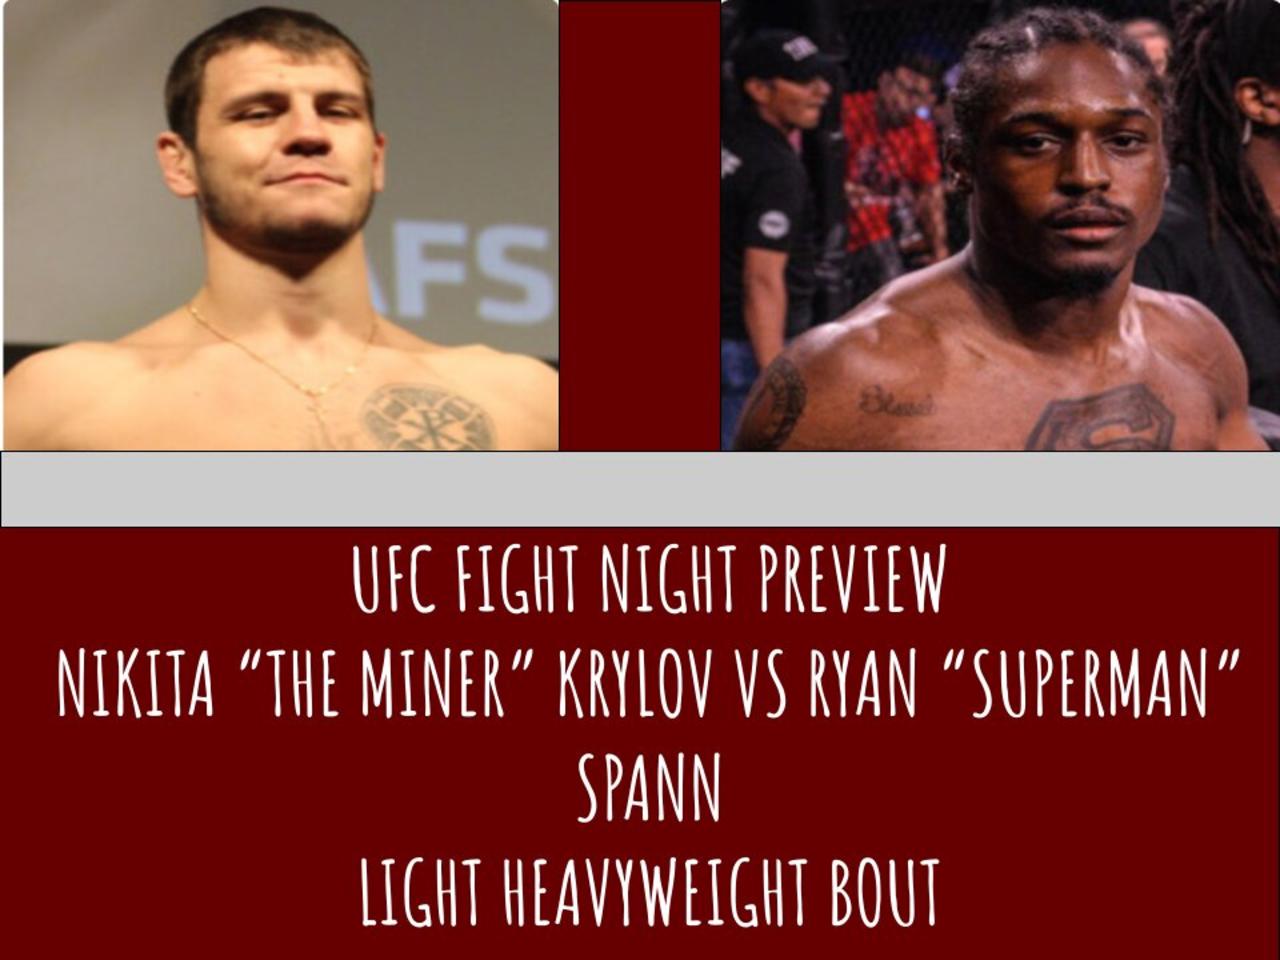 NIKITA “THE MINER” KRYLOV VS RYAN “SUPERMAN” SPANN UFC FIGHT NIGHT PREVIEW.WHAT TO EXPECT.WHO WINS??